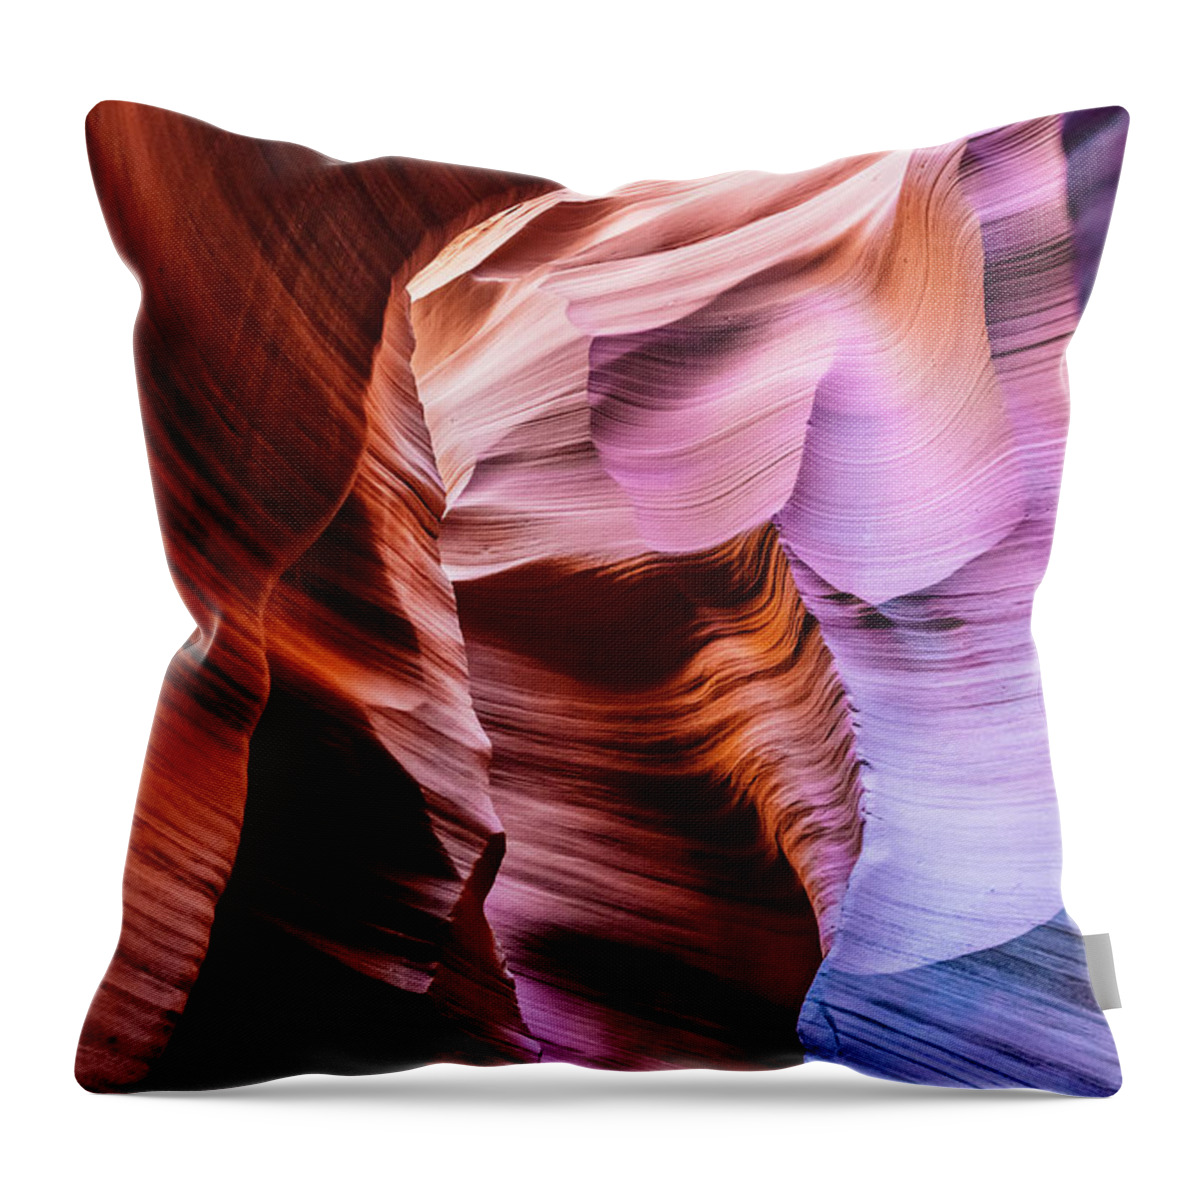 Curve Throw Pillow featuring the photograph Antelope Canyon Spiral Rock Arches by Deimagine